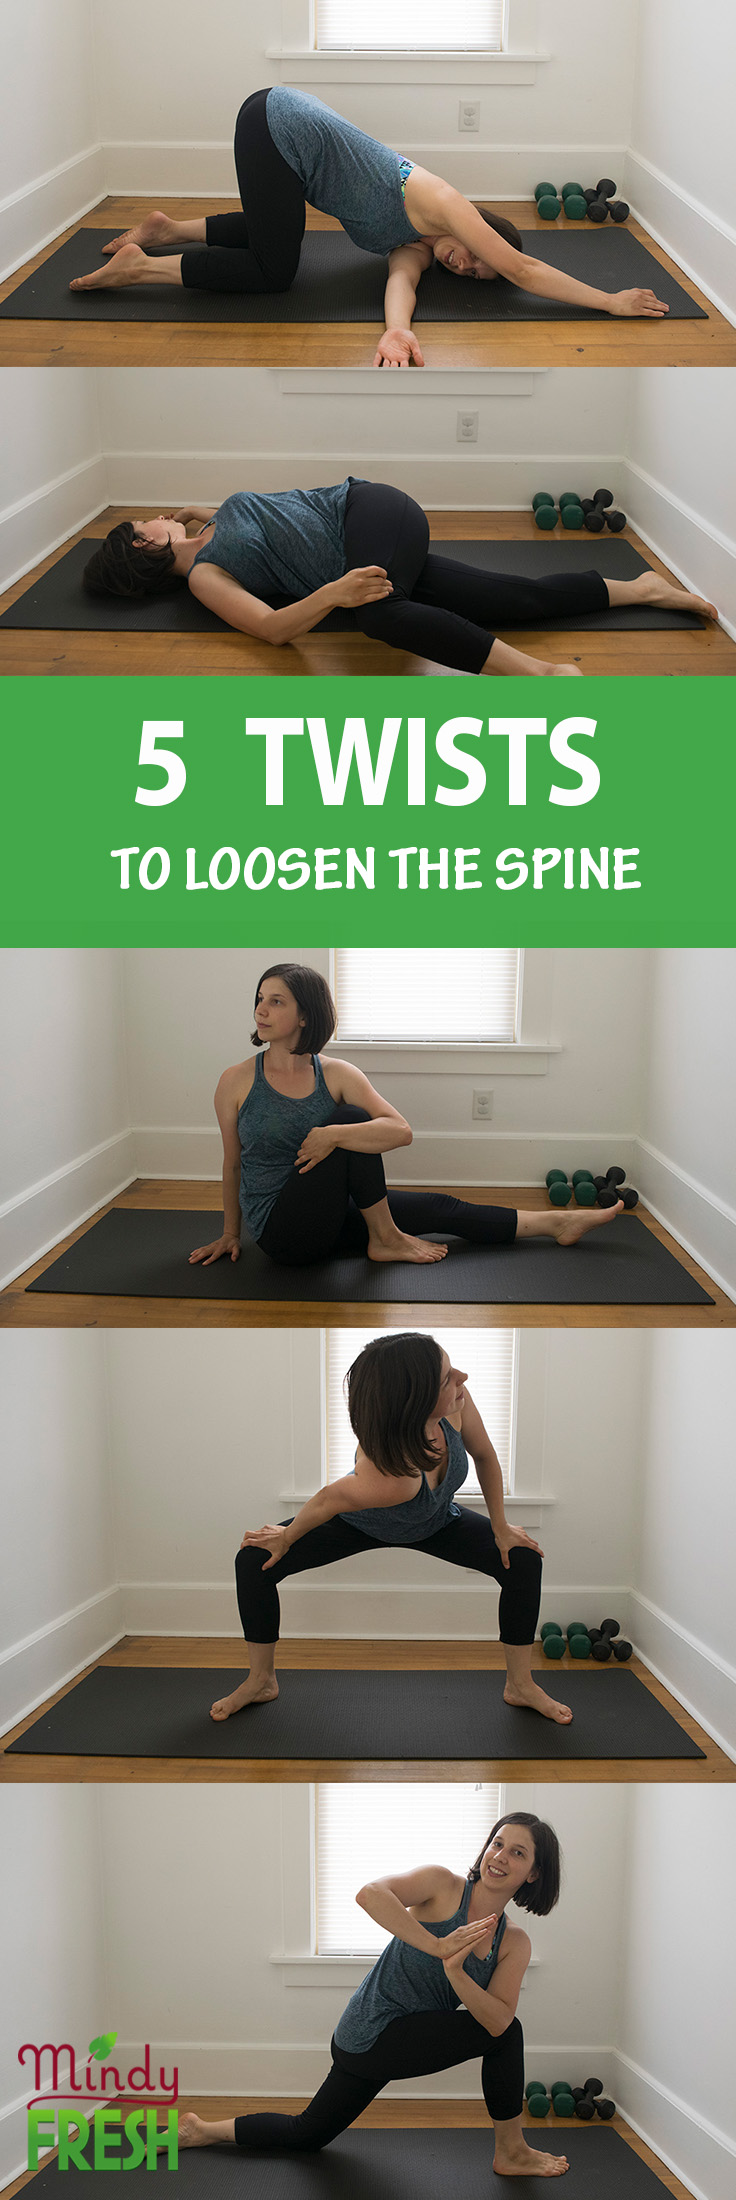 twisting spine stretches